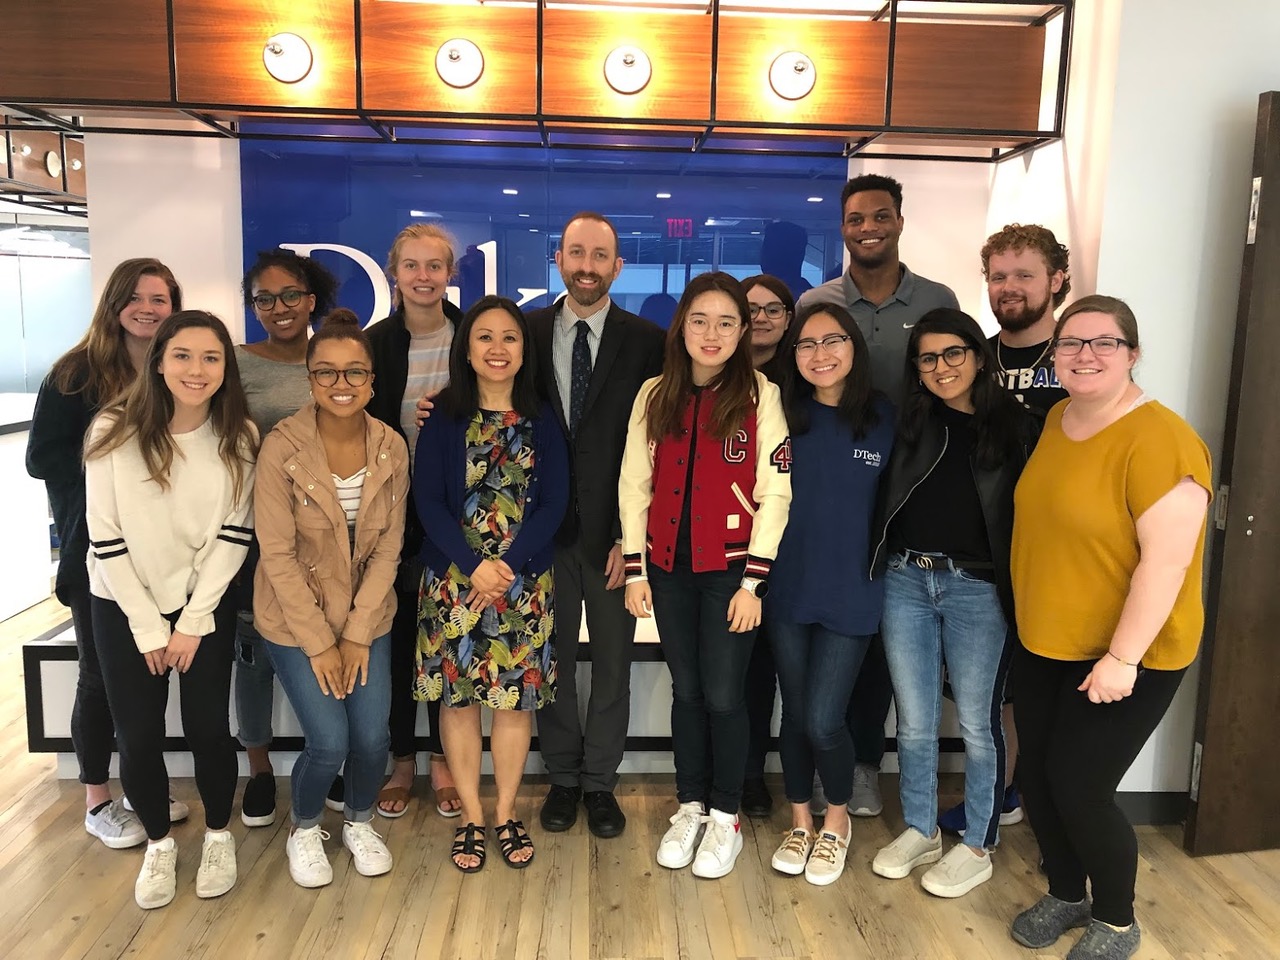 Our class with Duke alums Kathy Tran and Matthew Reisman, who were guest speakers in a class on running for political office. Kathy has served in the Virginia House of Delegates since 2018, and her husband Matthew is Director of International Trade Policy at Microsoft.